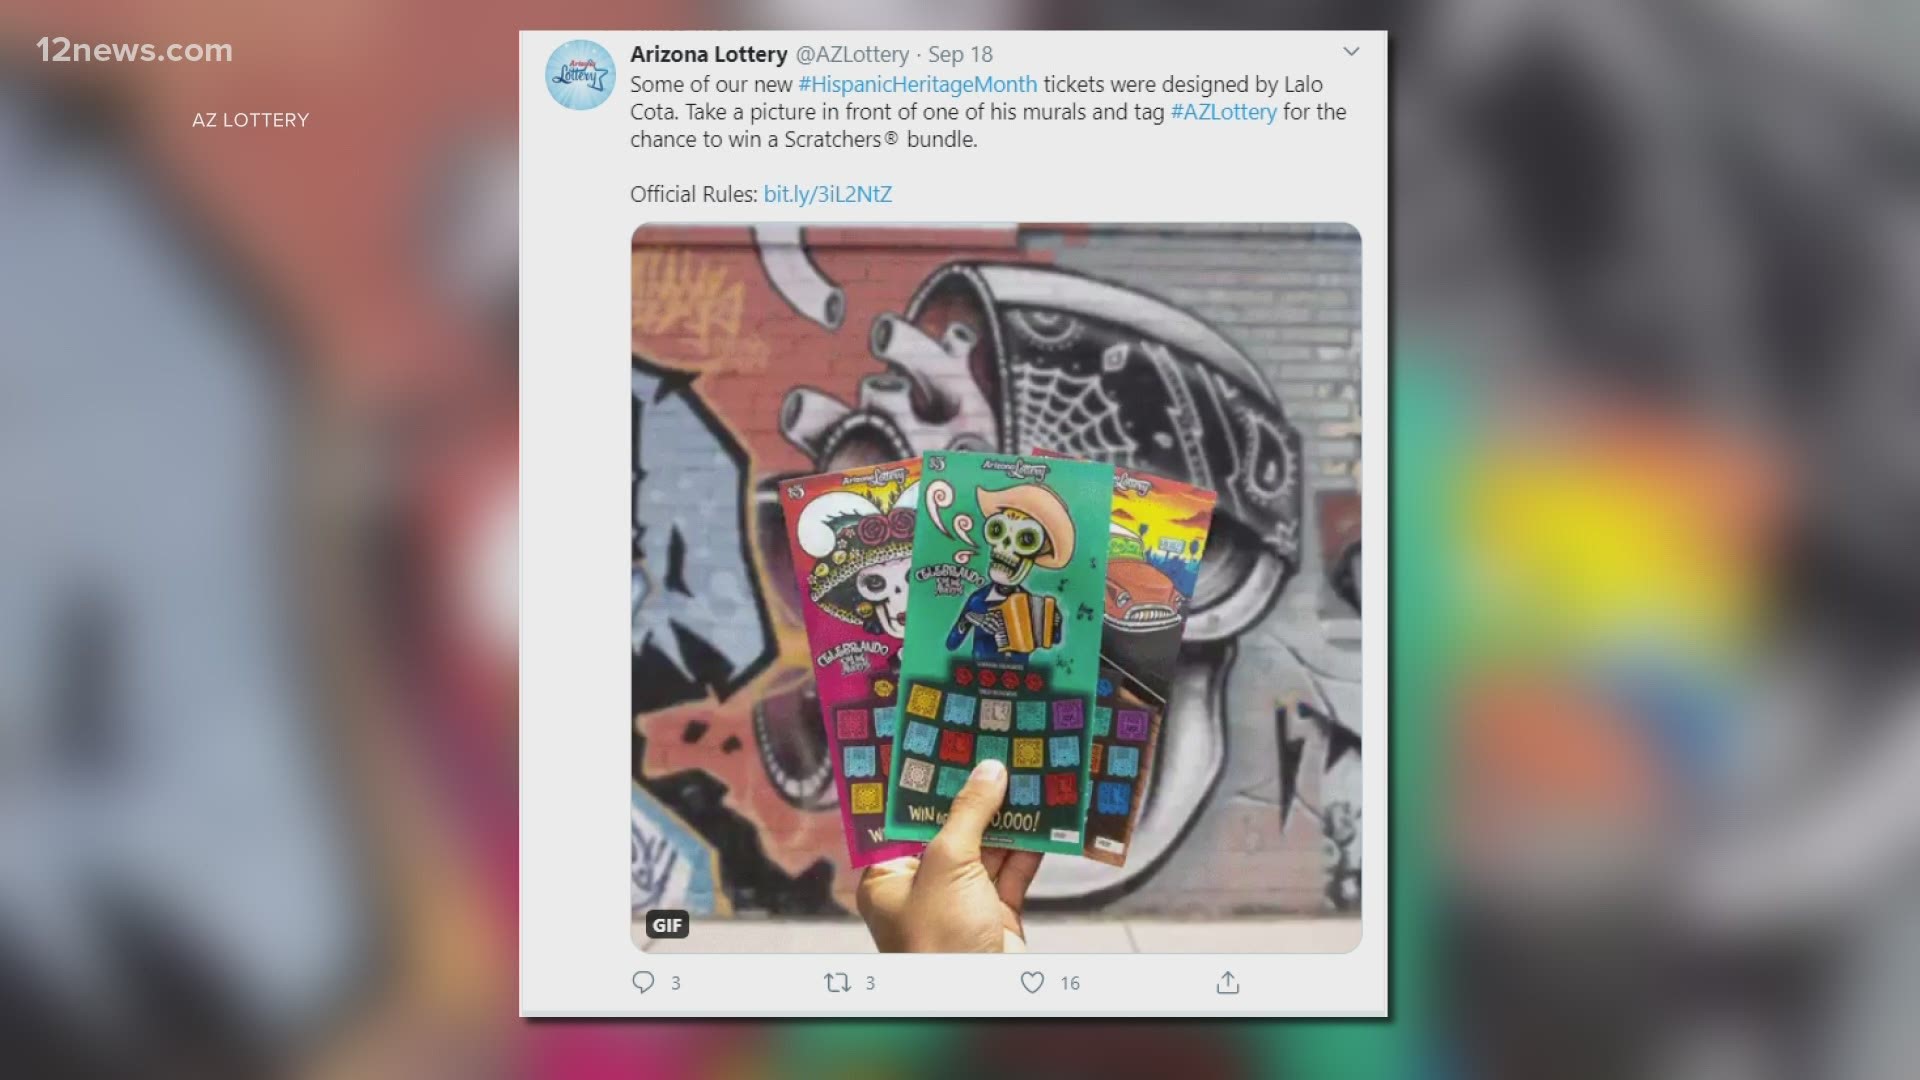 A local artist is getting some serious love from the Arizona Lottery.